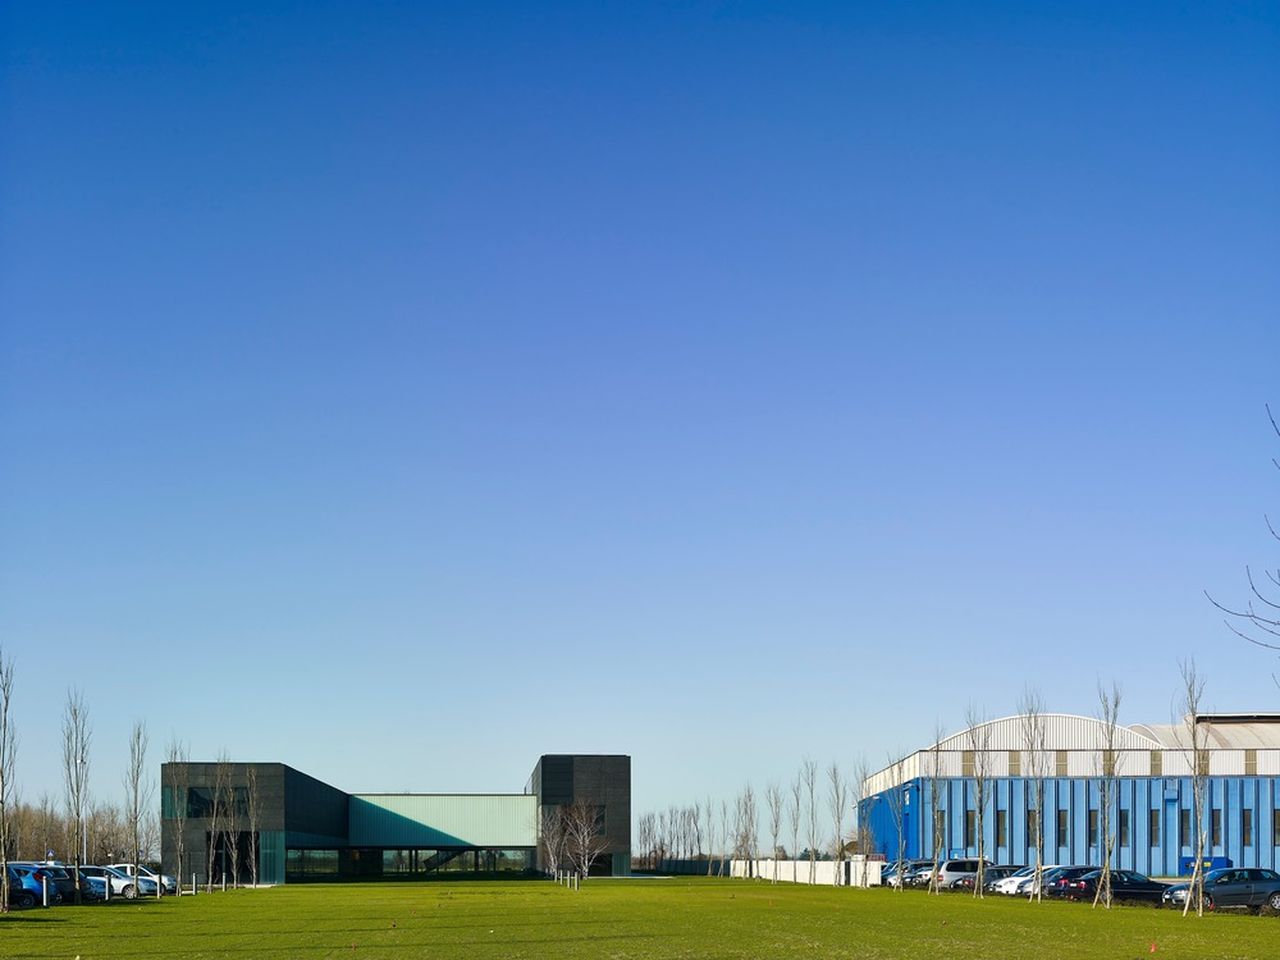 The building looks "small" compared to the surrounding industrial plants : Photo credit © Massimo Crivellari